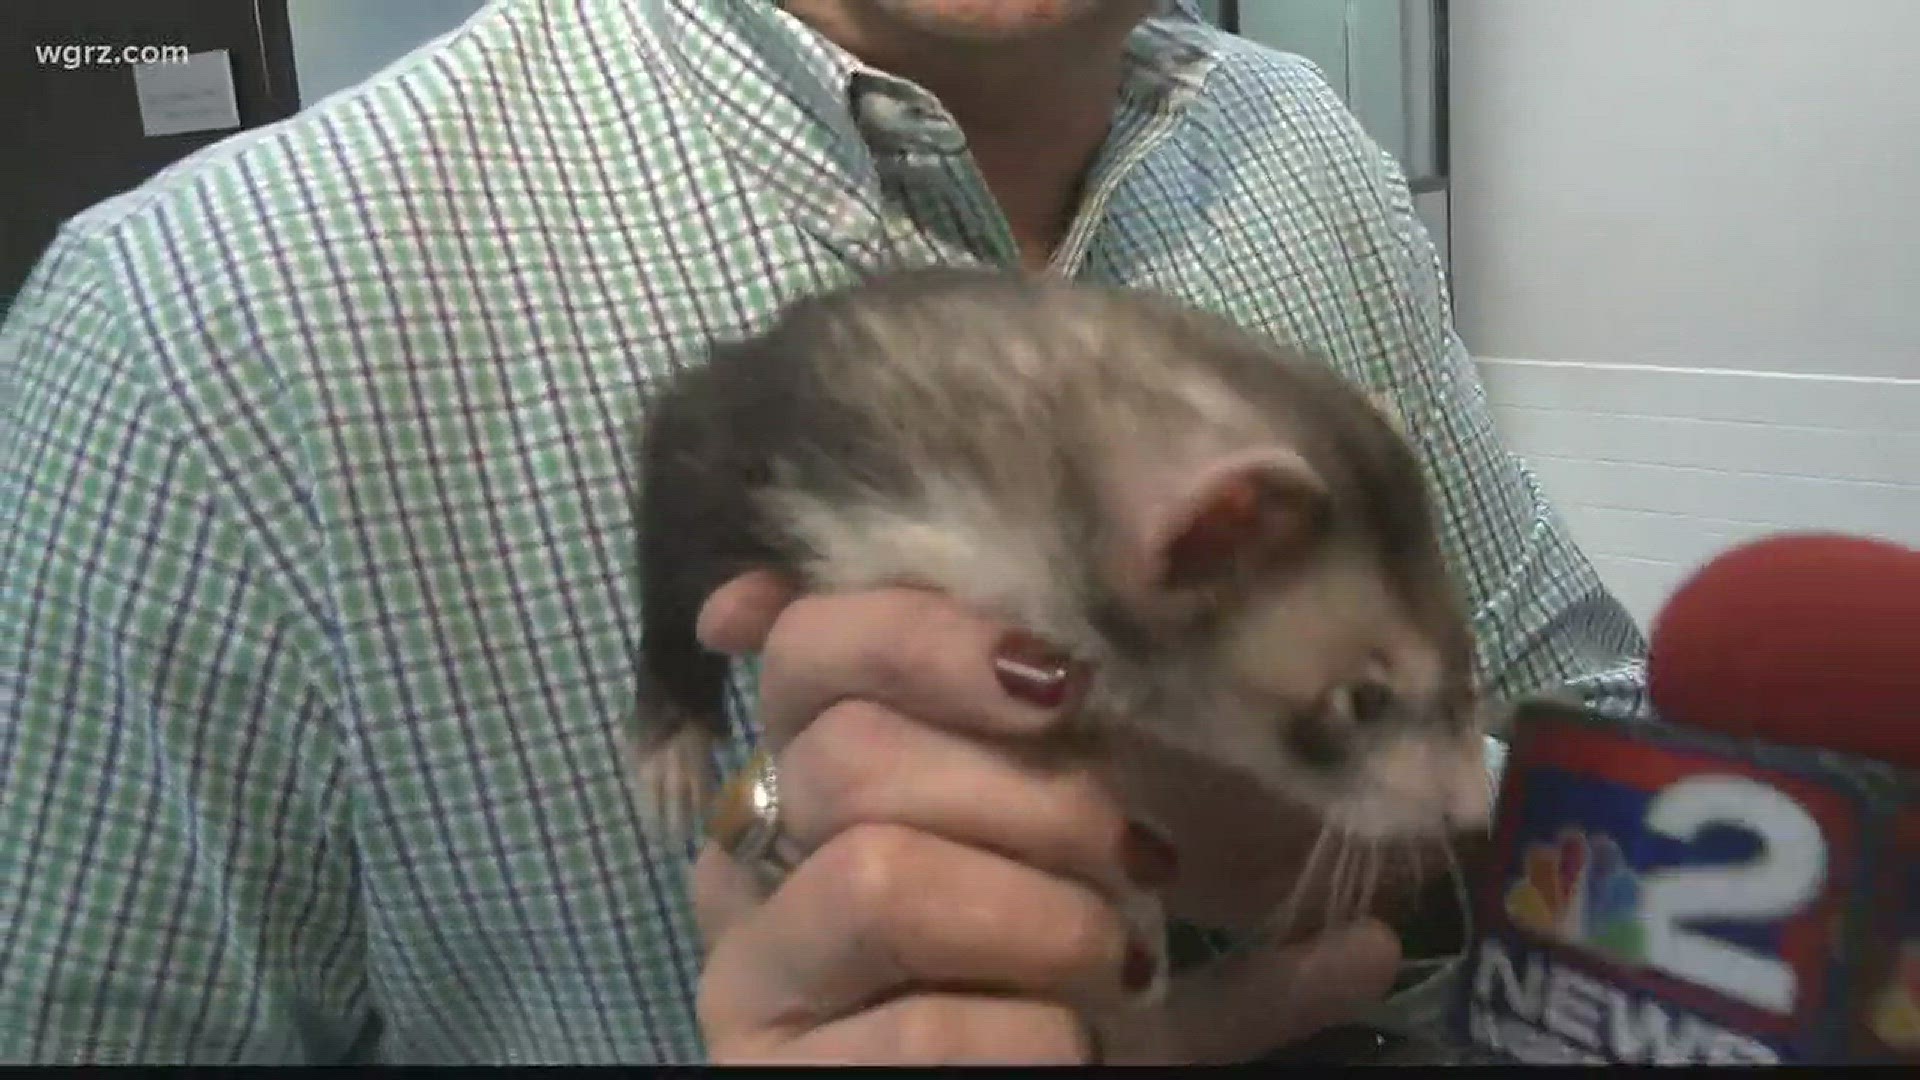 Fuzzy the ferret is ready for adoption at the Erie County SPCA